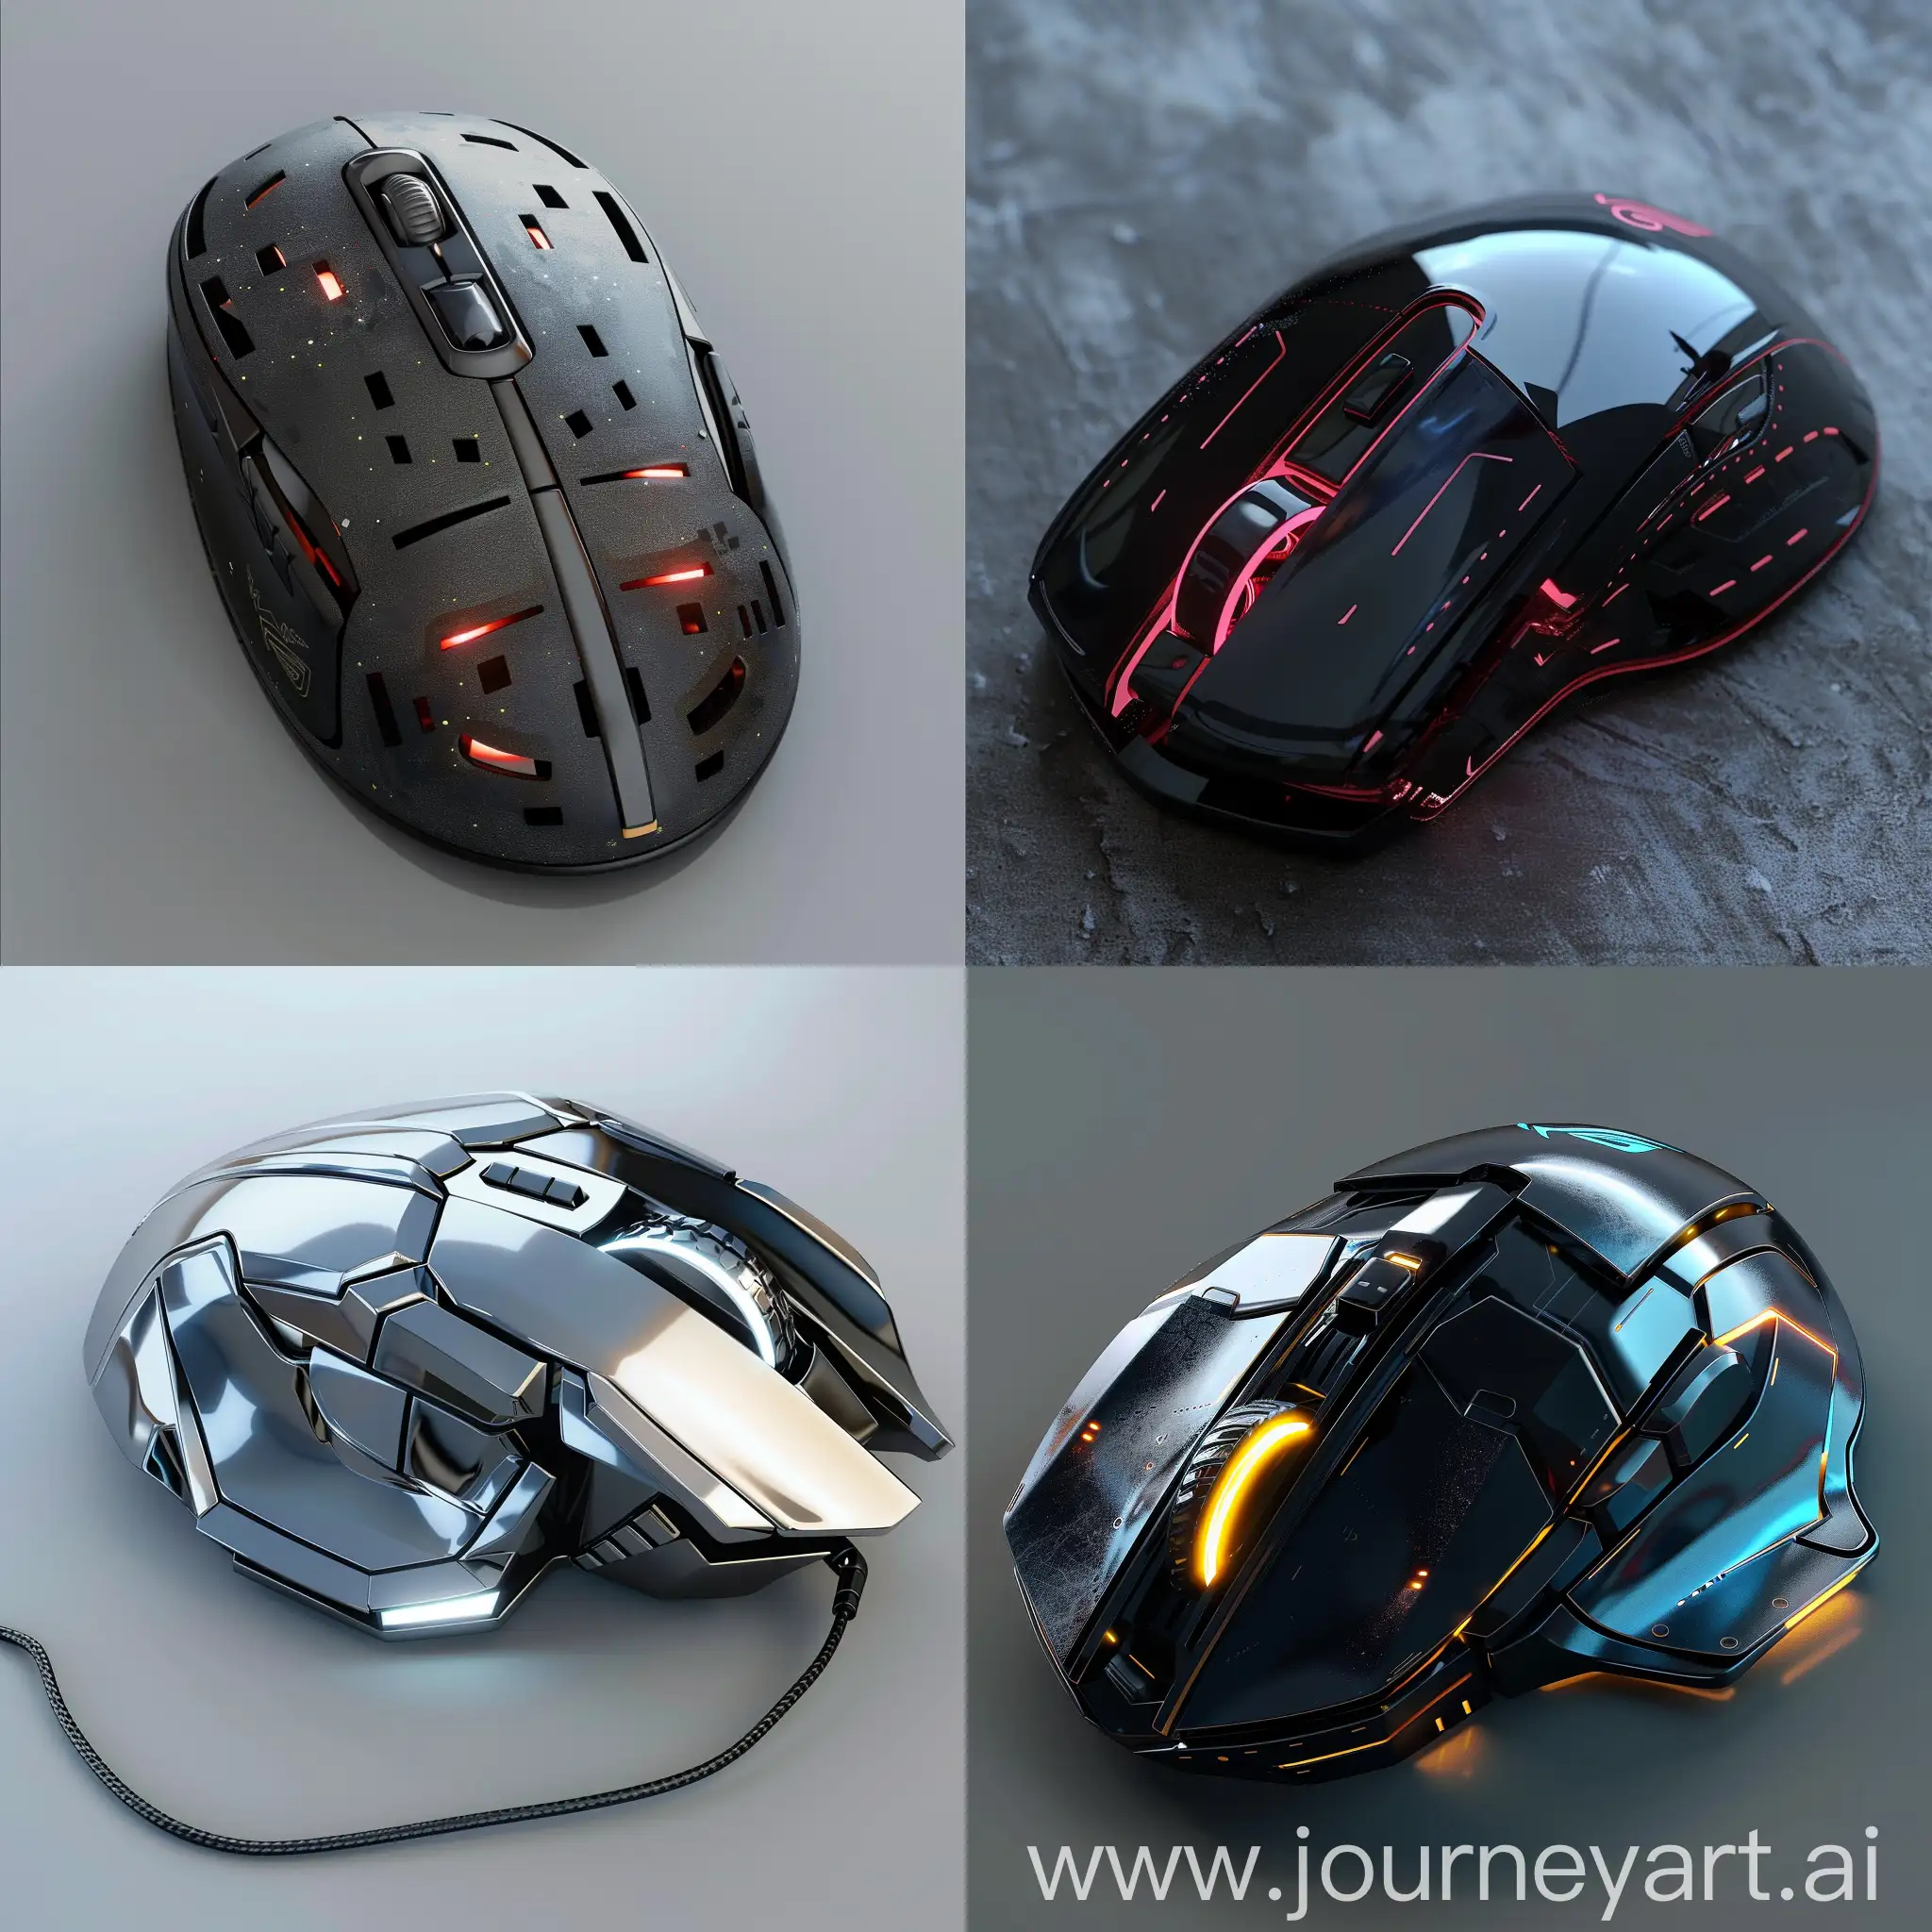 HighEnd-Gaming-Mouse-in-HyperRealistic-Setting